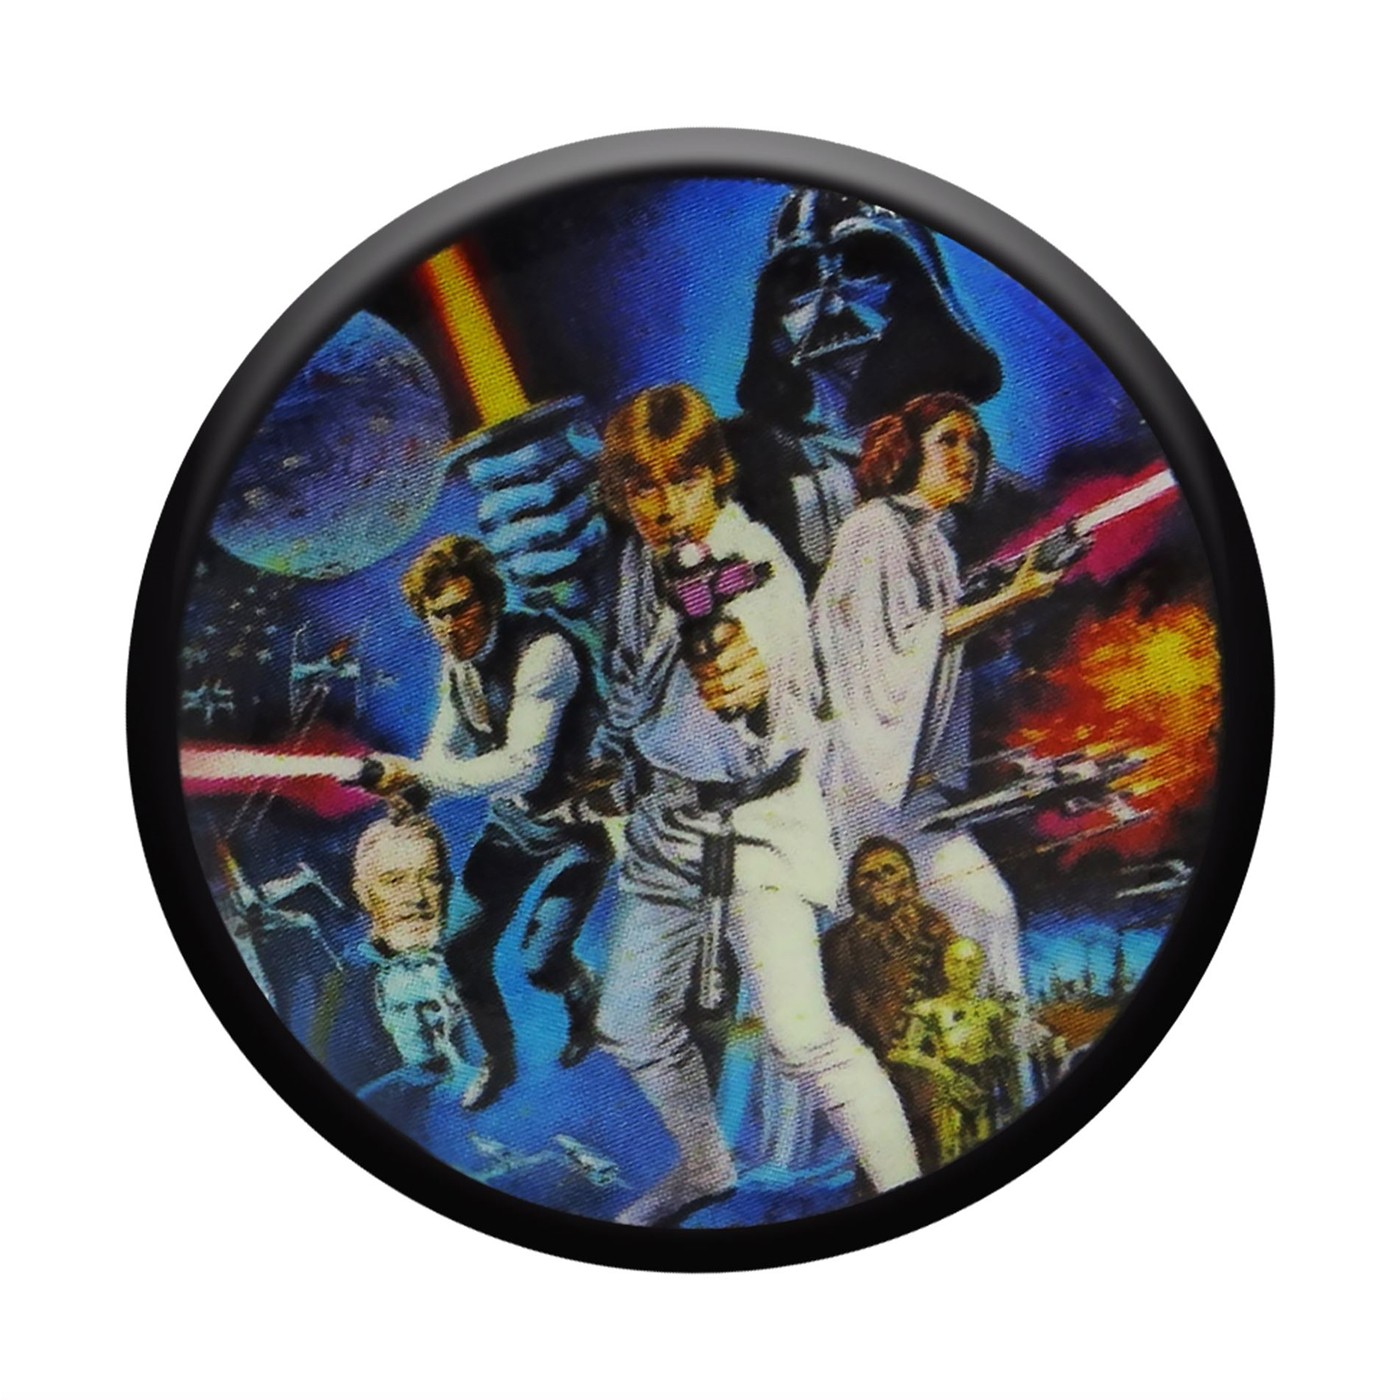 Star Wars A New Hope Poster Button